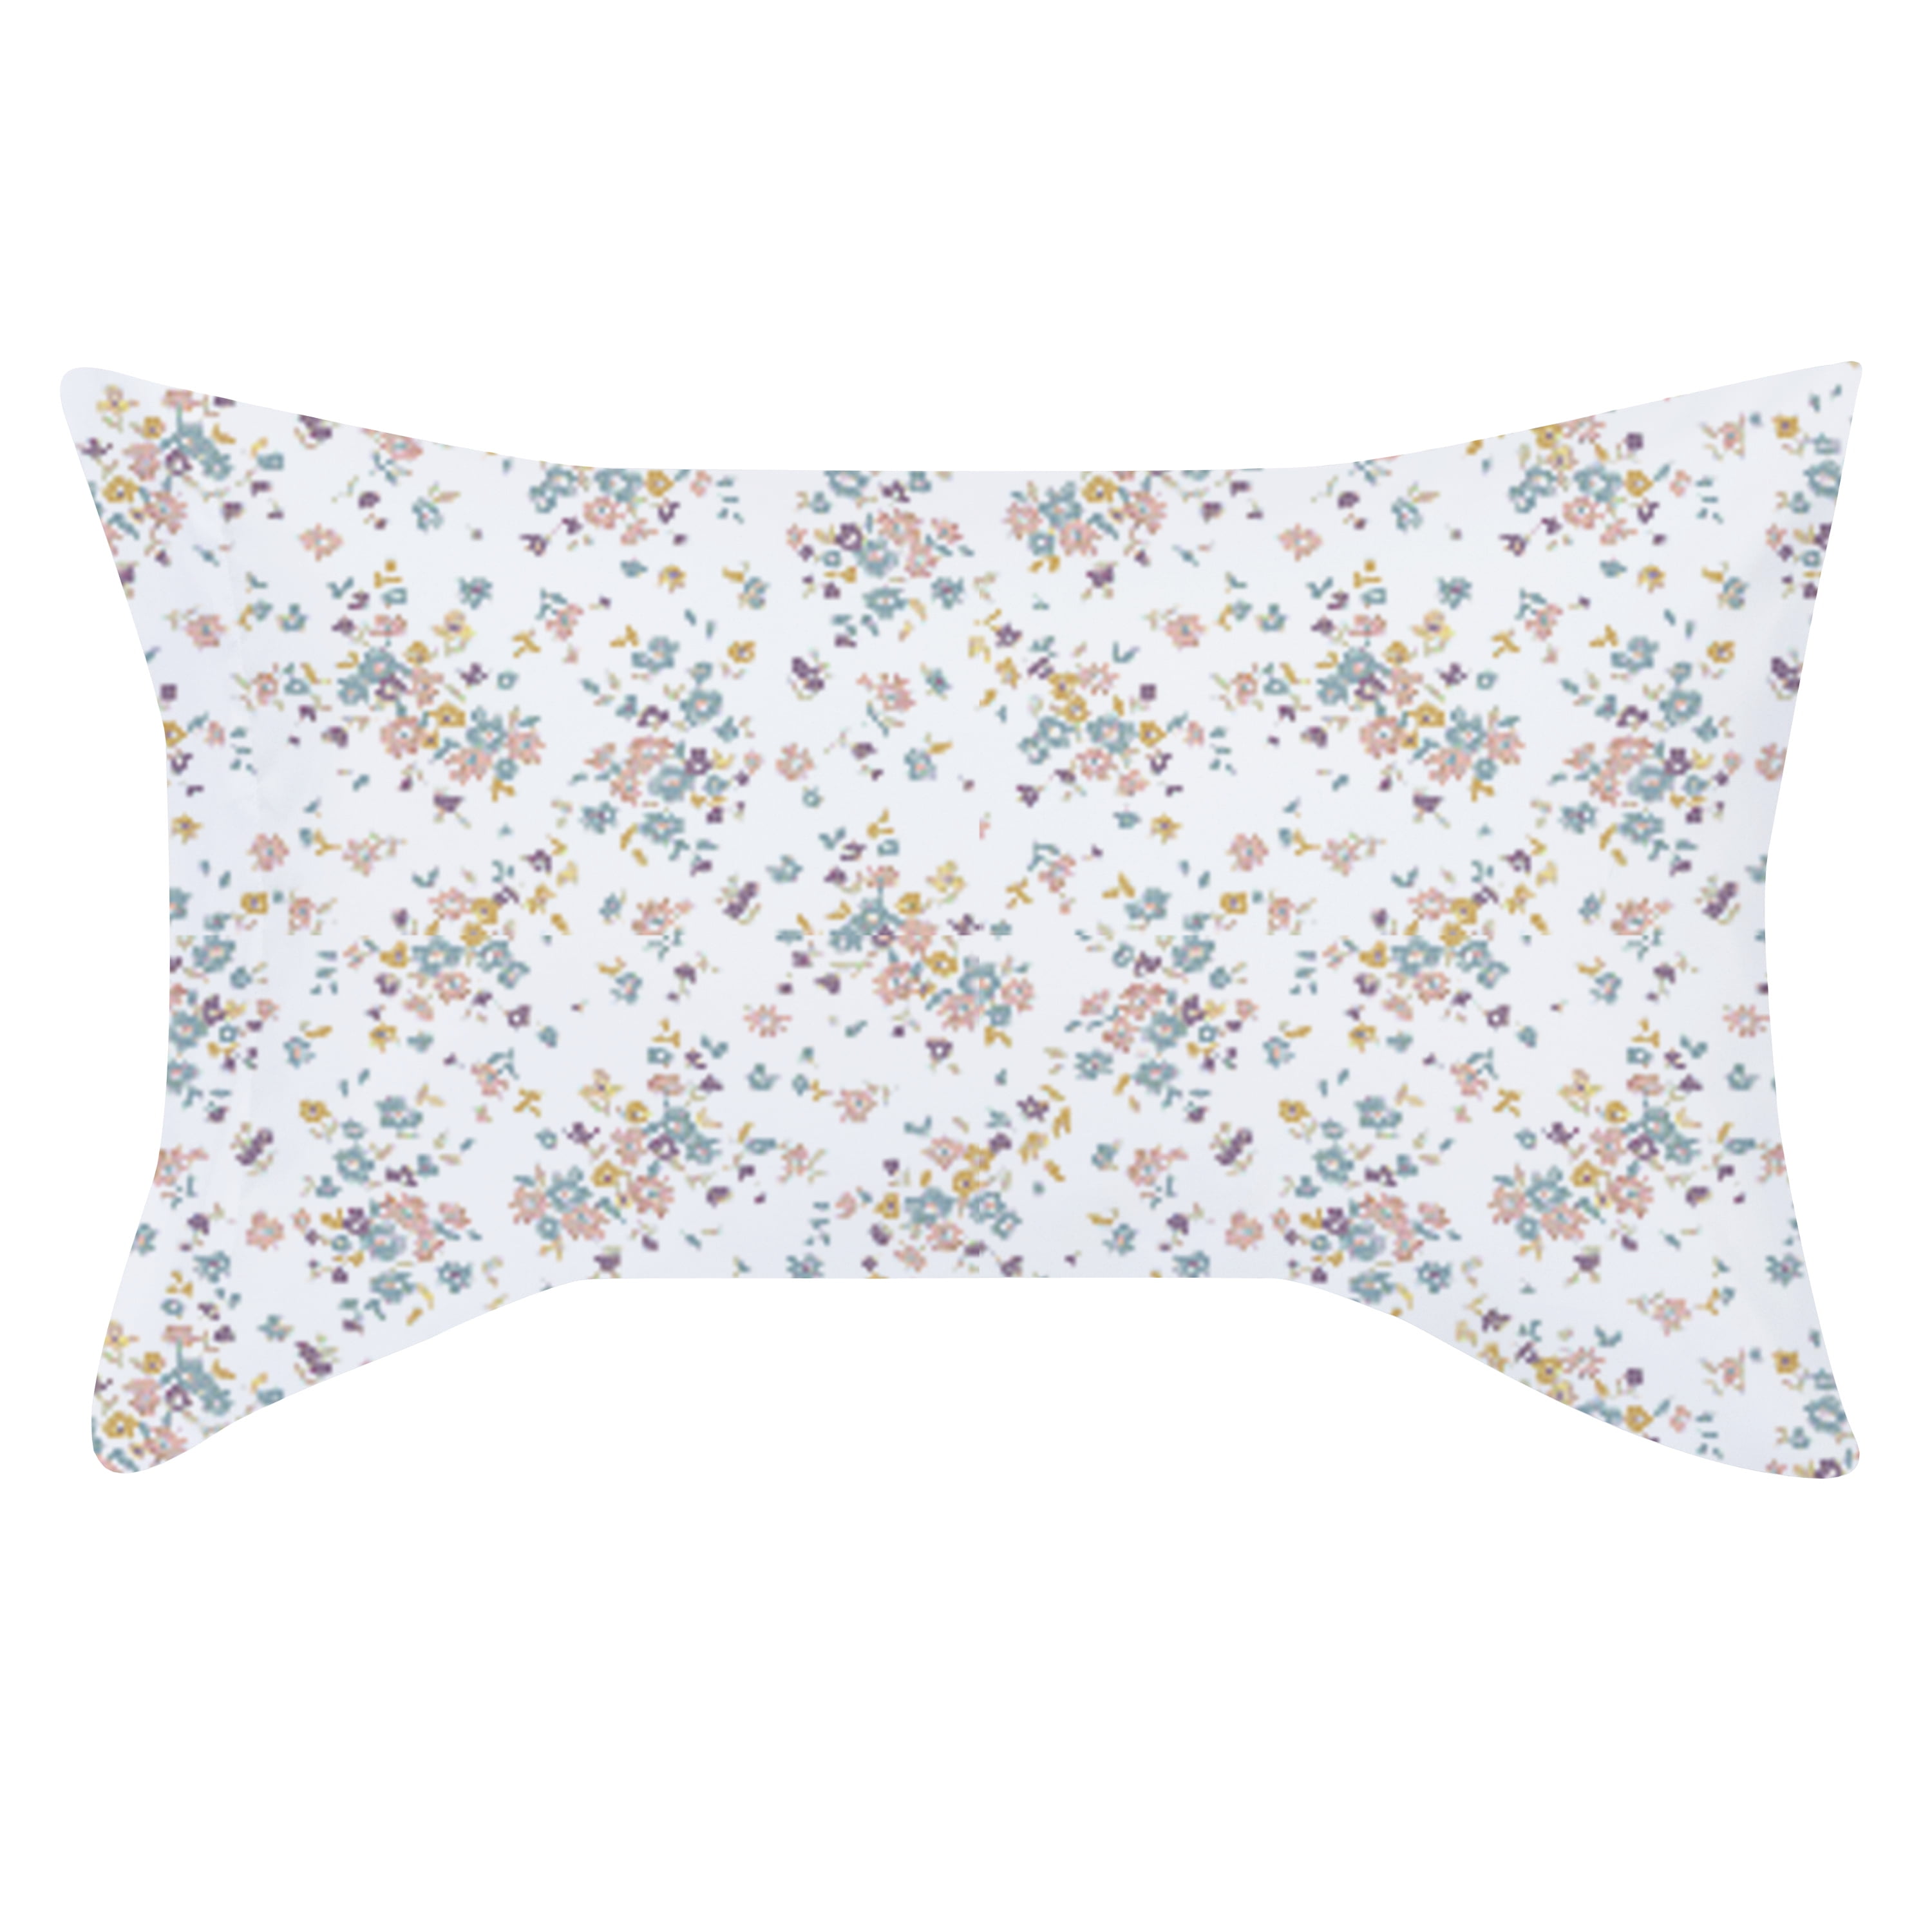 Mainstays Super Soft Recycled Brushed Microfiber Pillowcase Set Stdqueen White Floral 2 8443